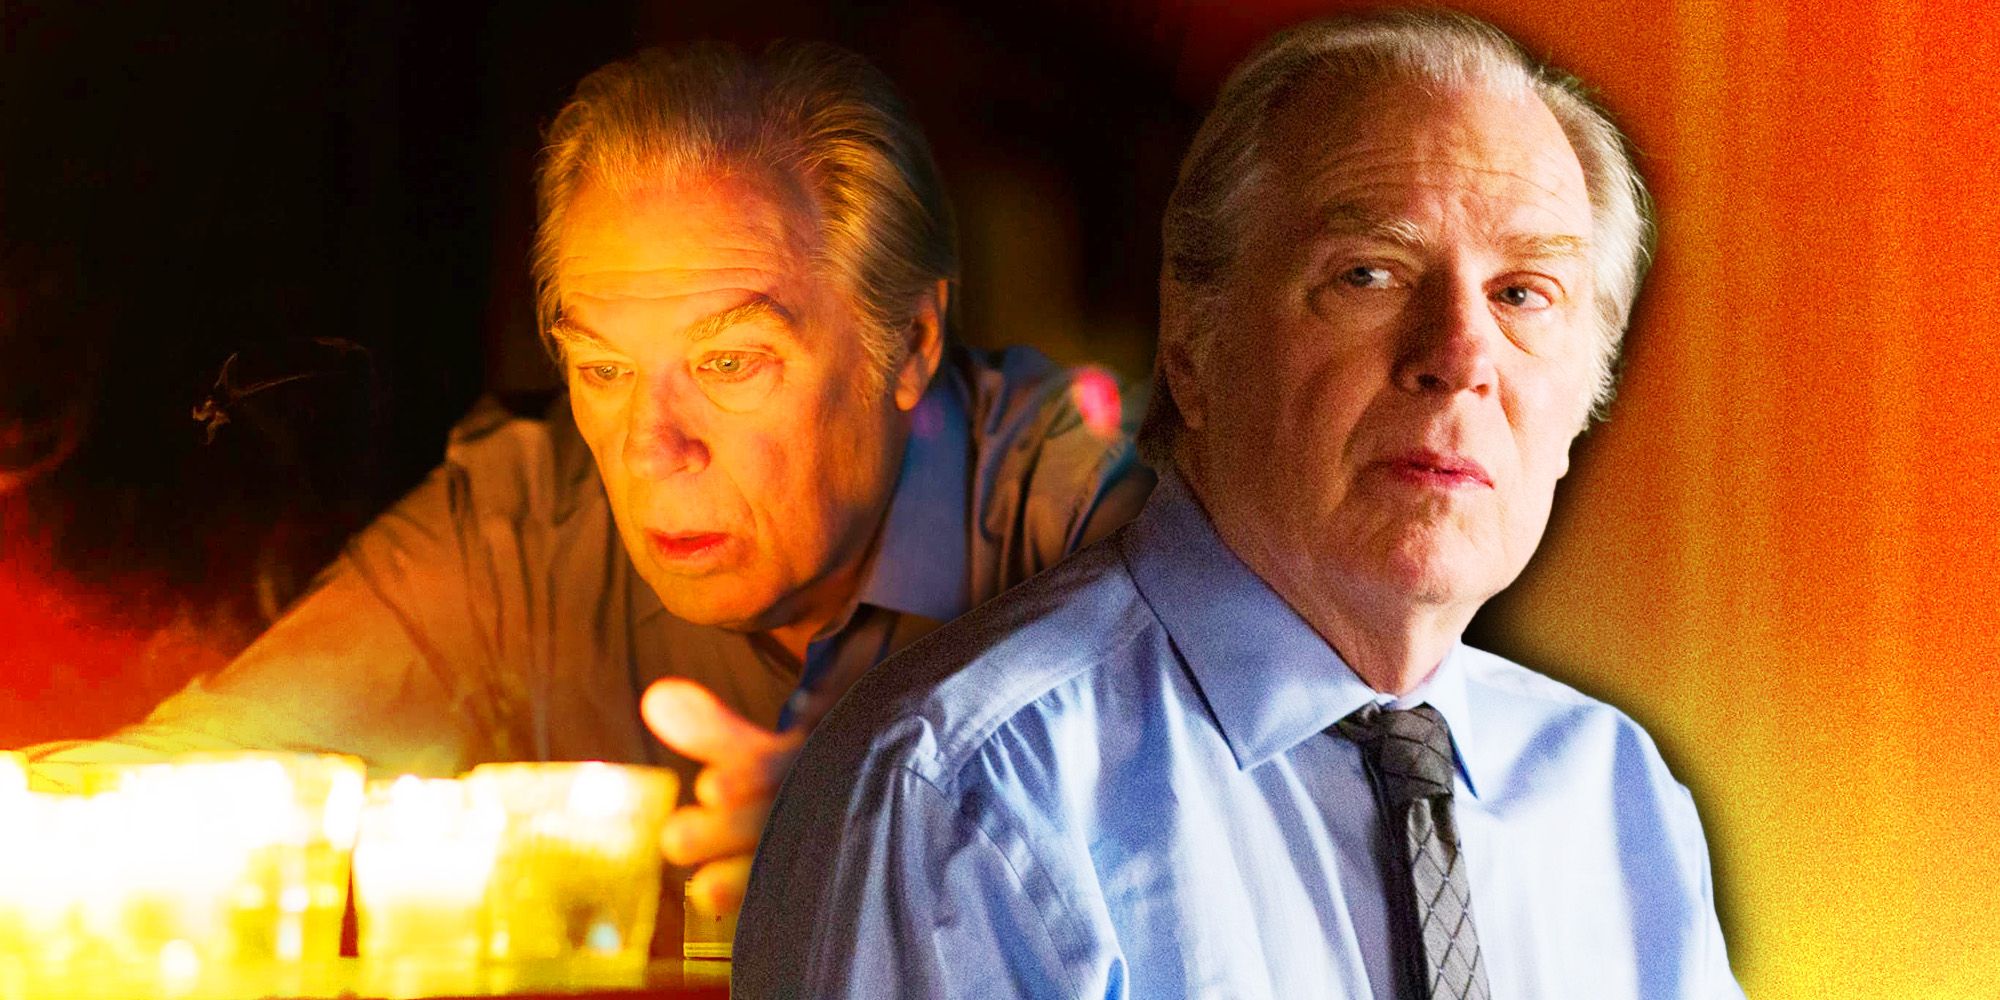 A composition of Chuck McGill in Better Call Saul's 